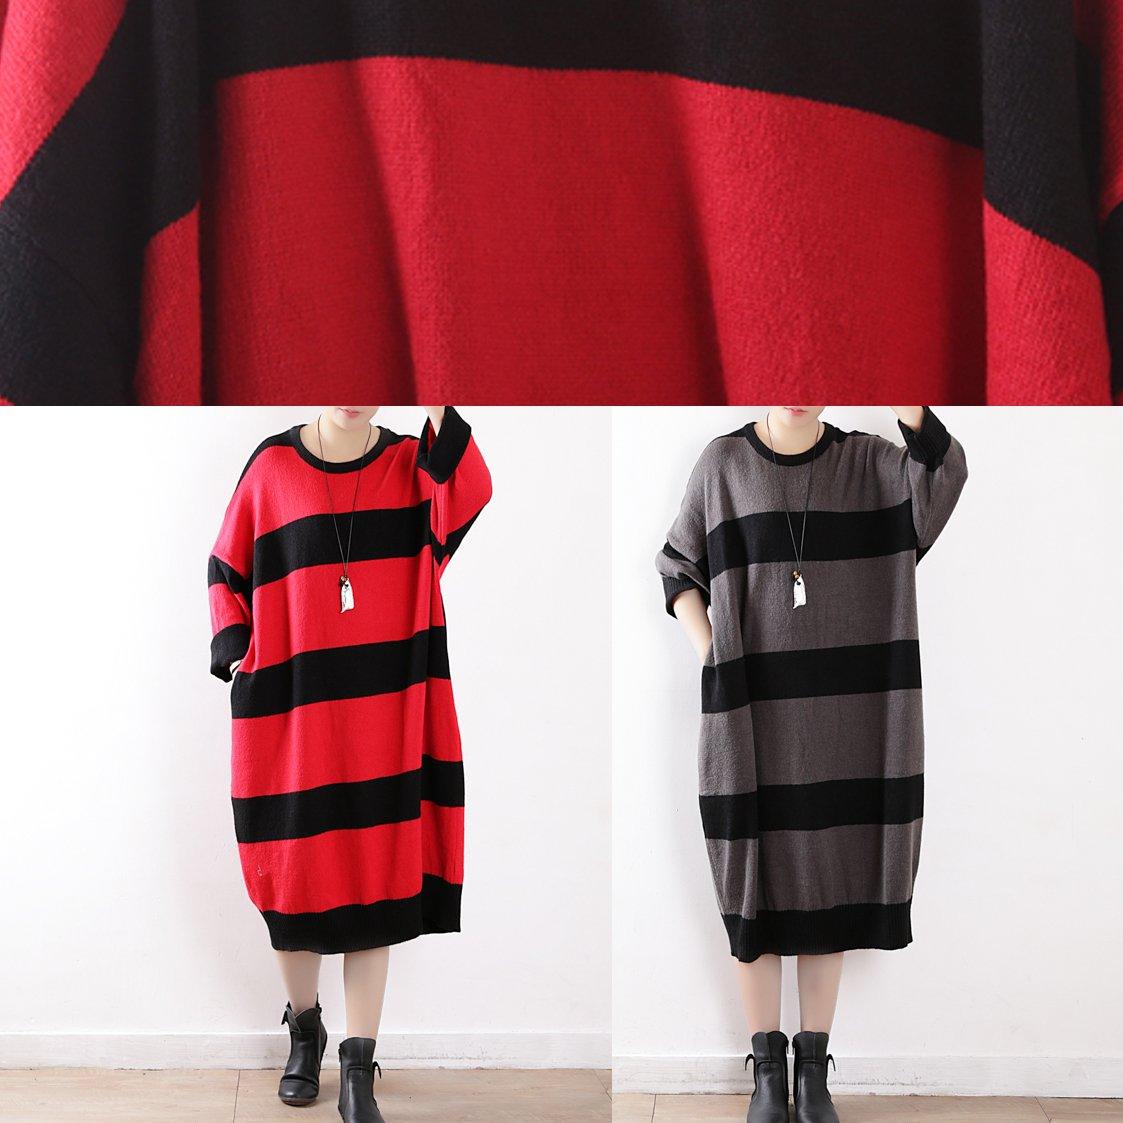 For Work Batwing Sleeve Sweater dresses Women gray striped oversized knit top fall - Omychic